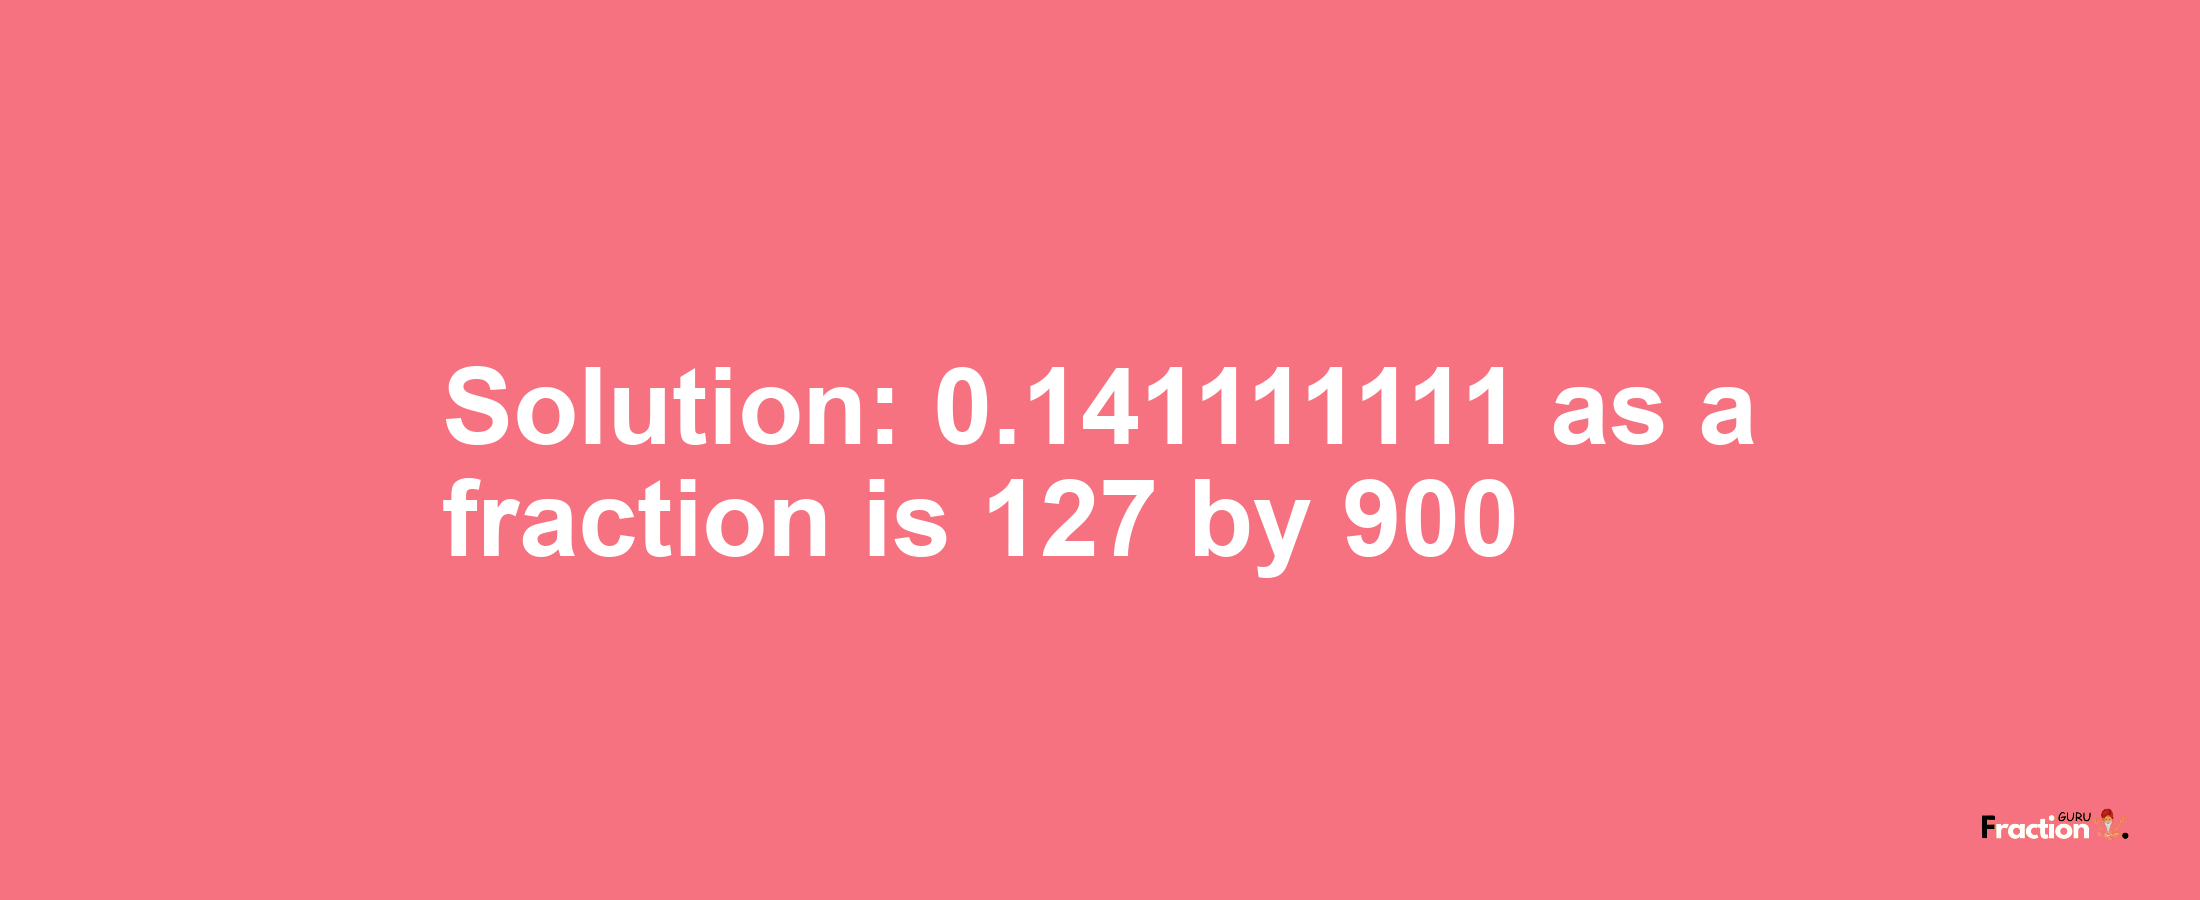 Solution:0.141111111 as a fraction is 127/900